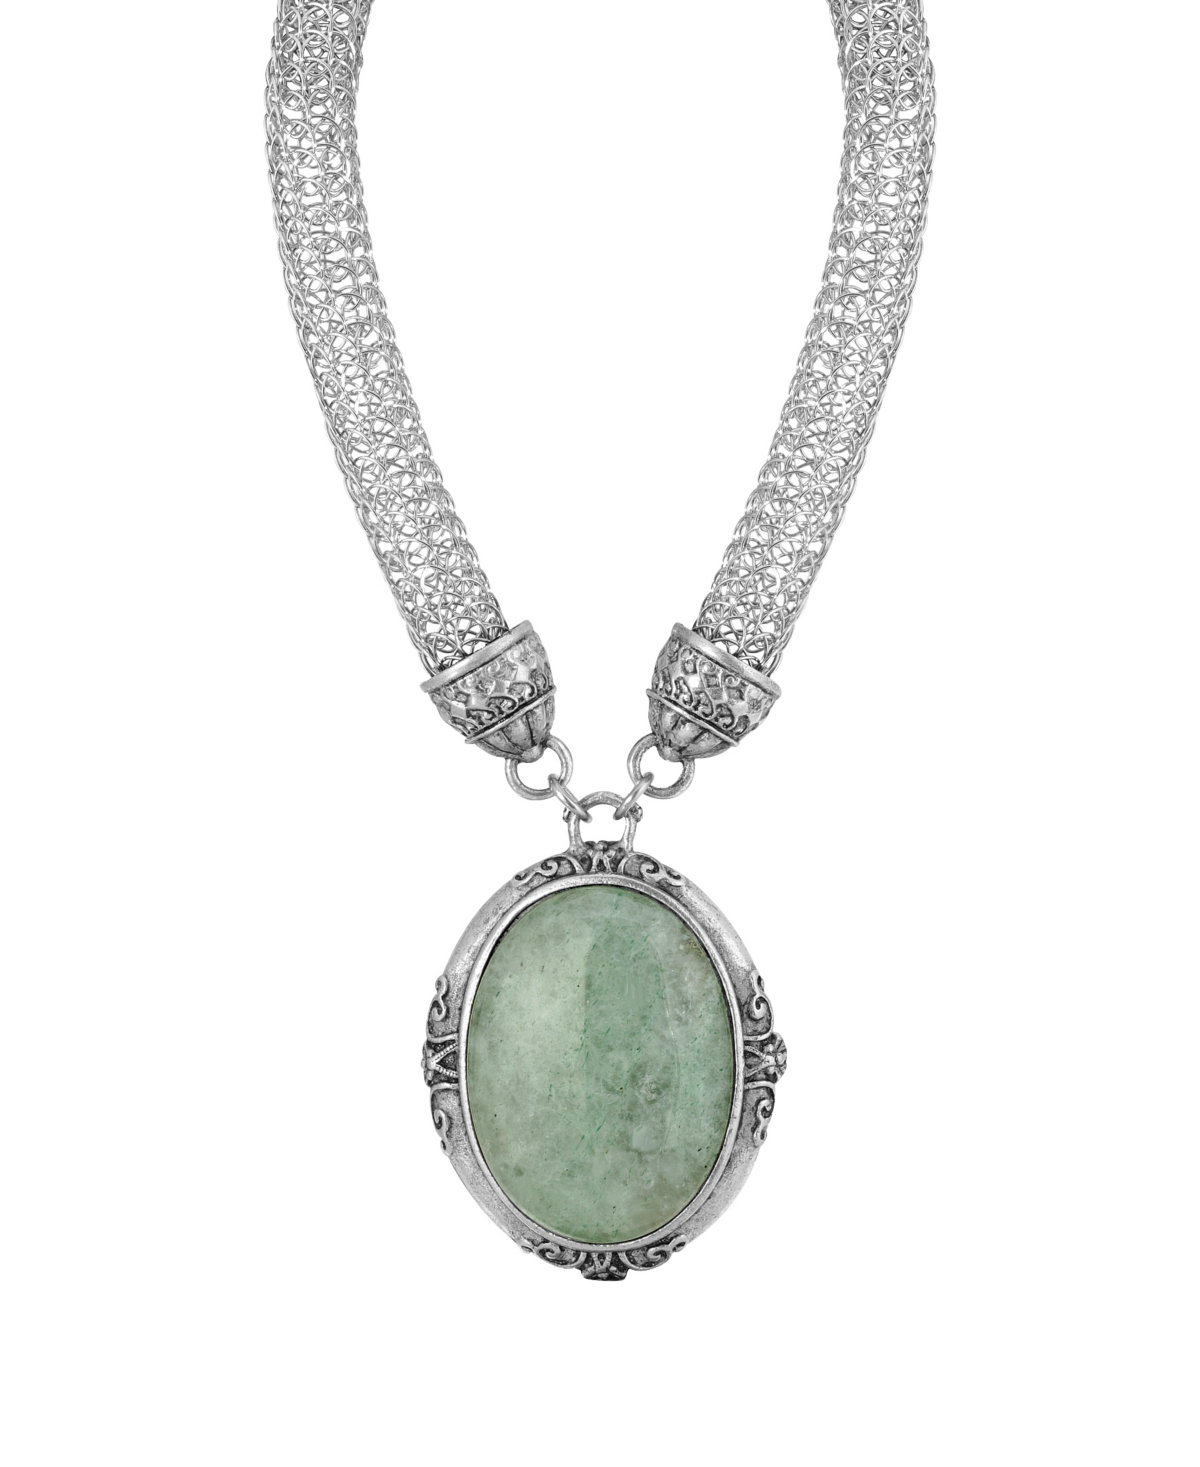 2028 Silver-tone Mesh Tube Chain With Oval Green Pendant 18" Necklace